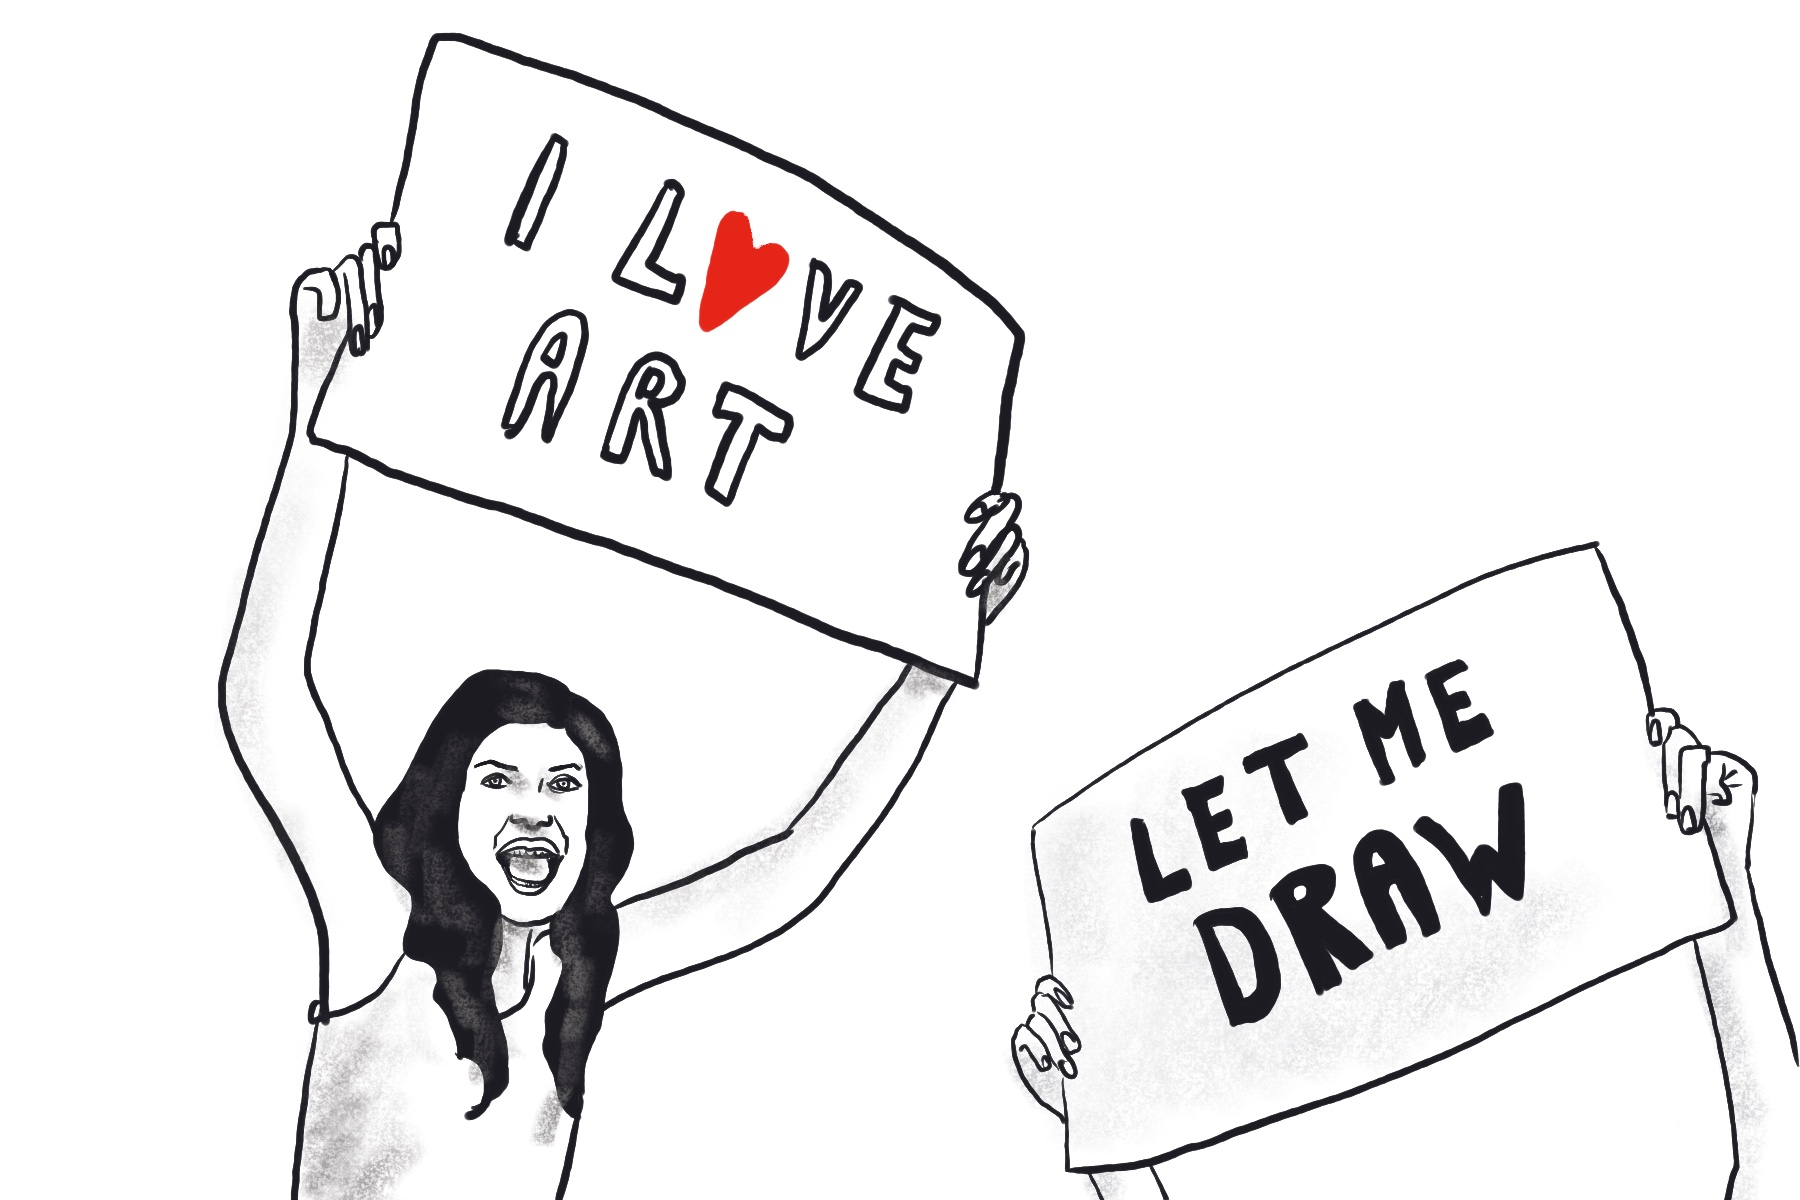 5 Reasons to Love and Hate How-to-Draw Books - The Art of Education  University